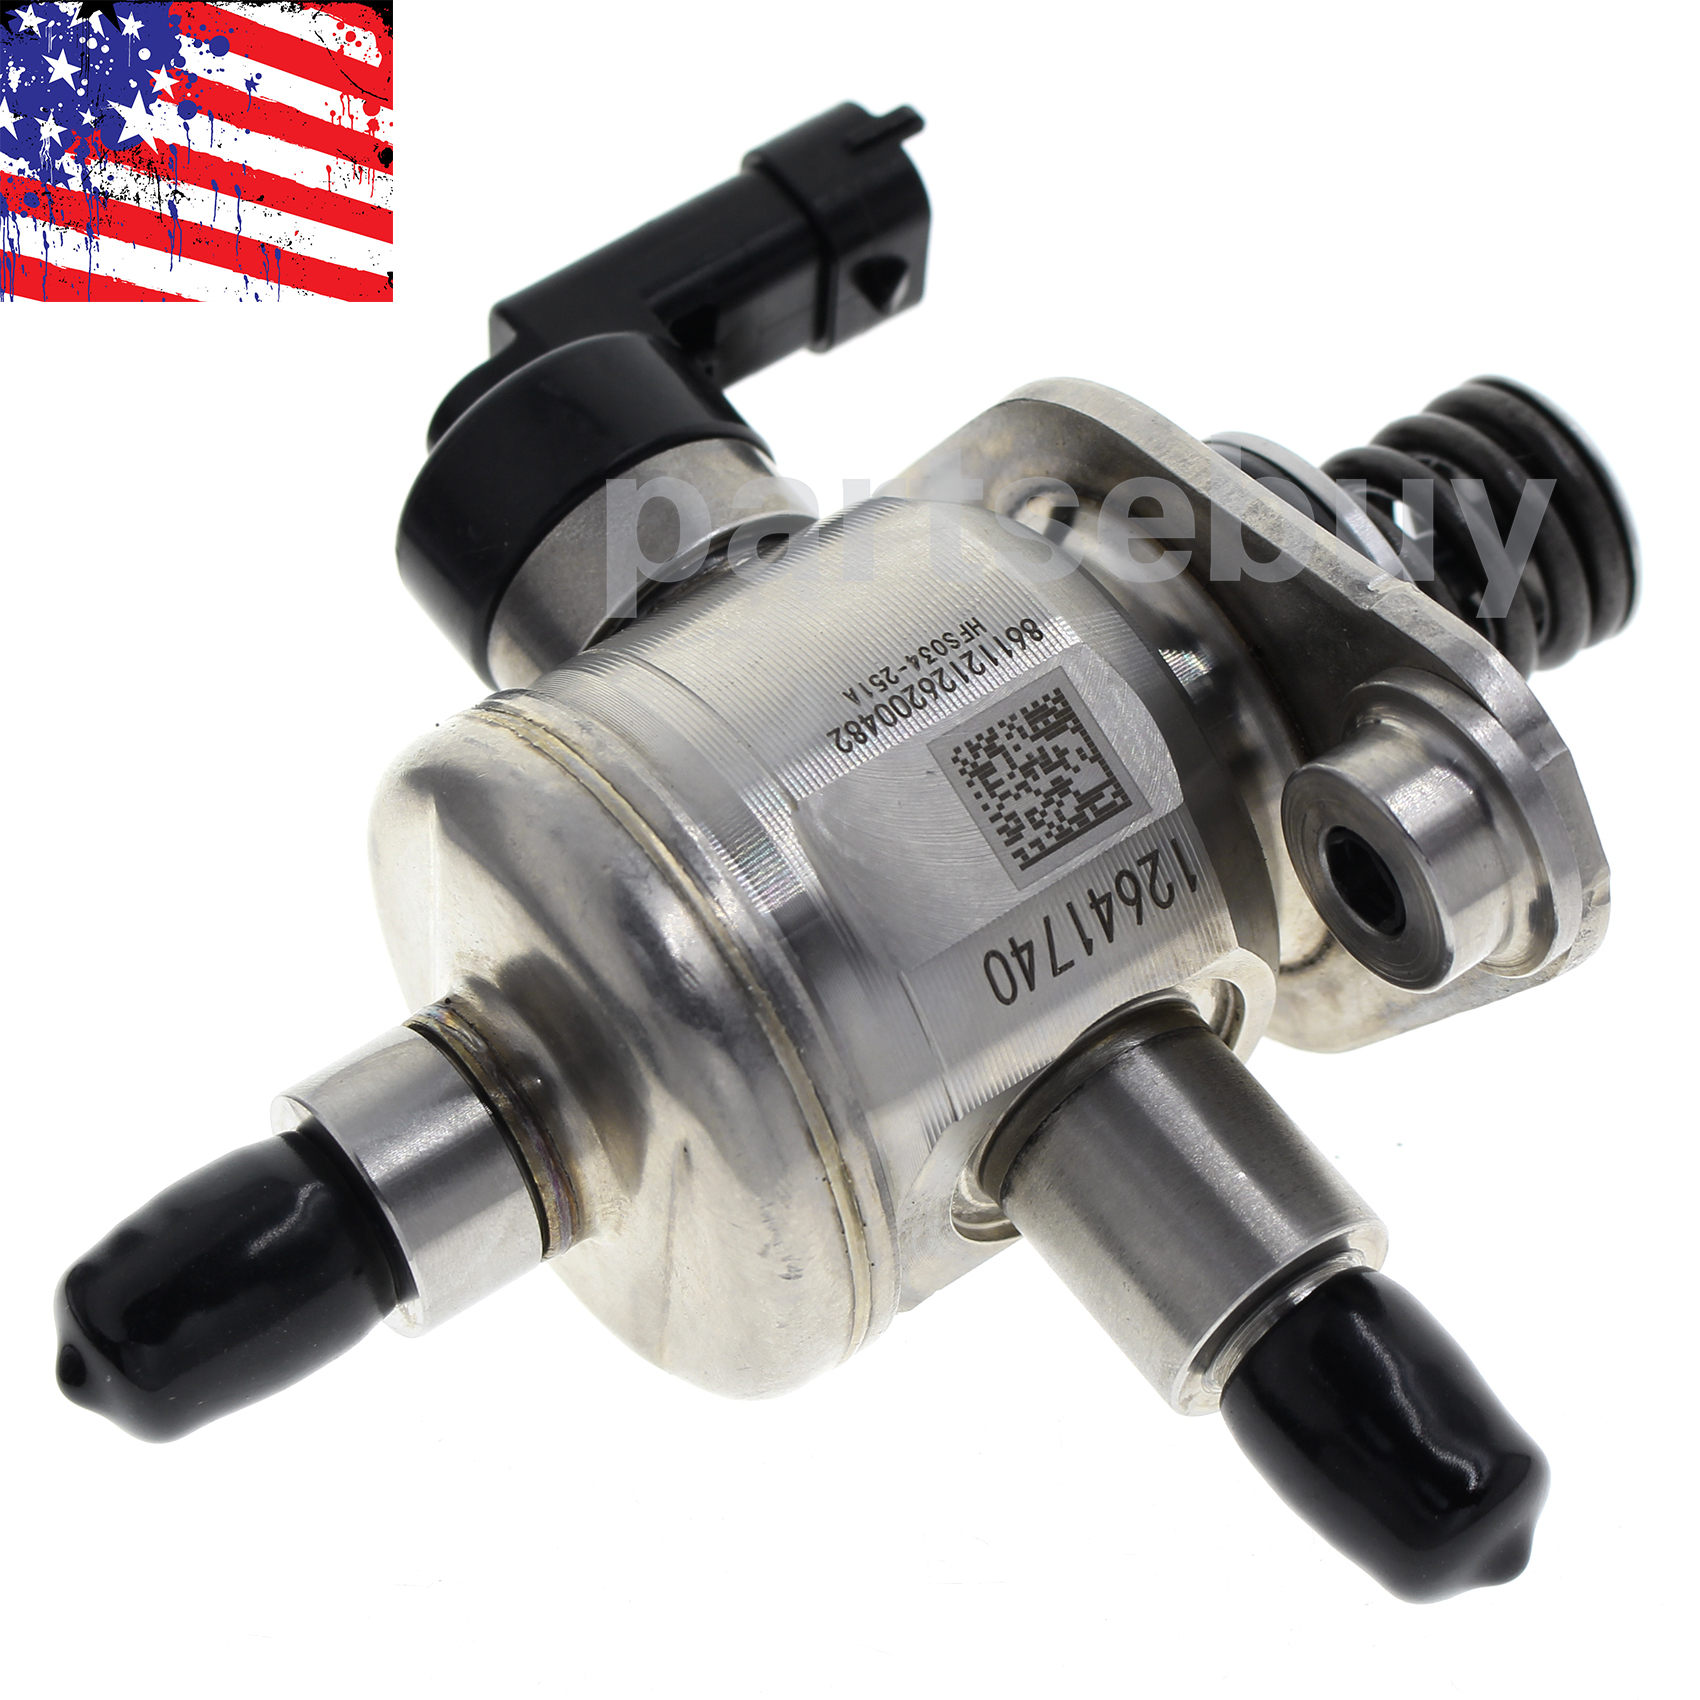 For 12622475 GM High Pressure Fuel Pump Buick Cadillac Chevy GMC 3.0L ...